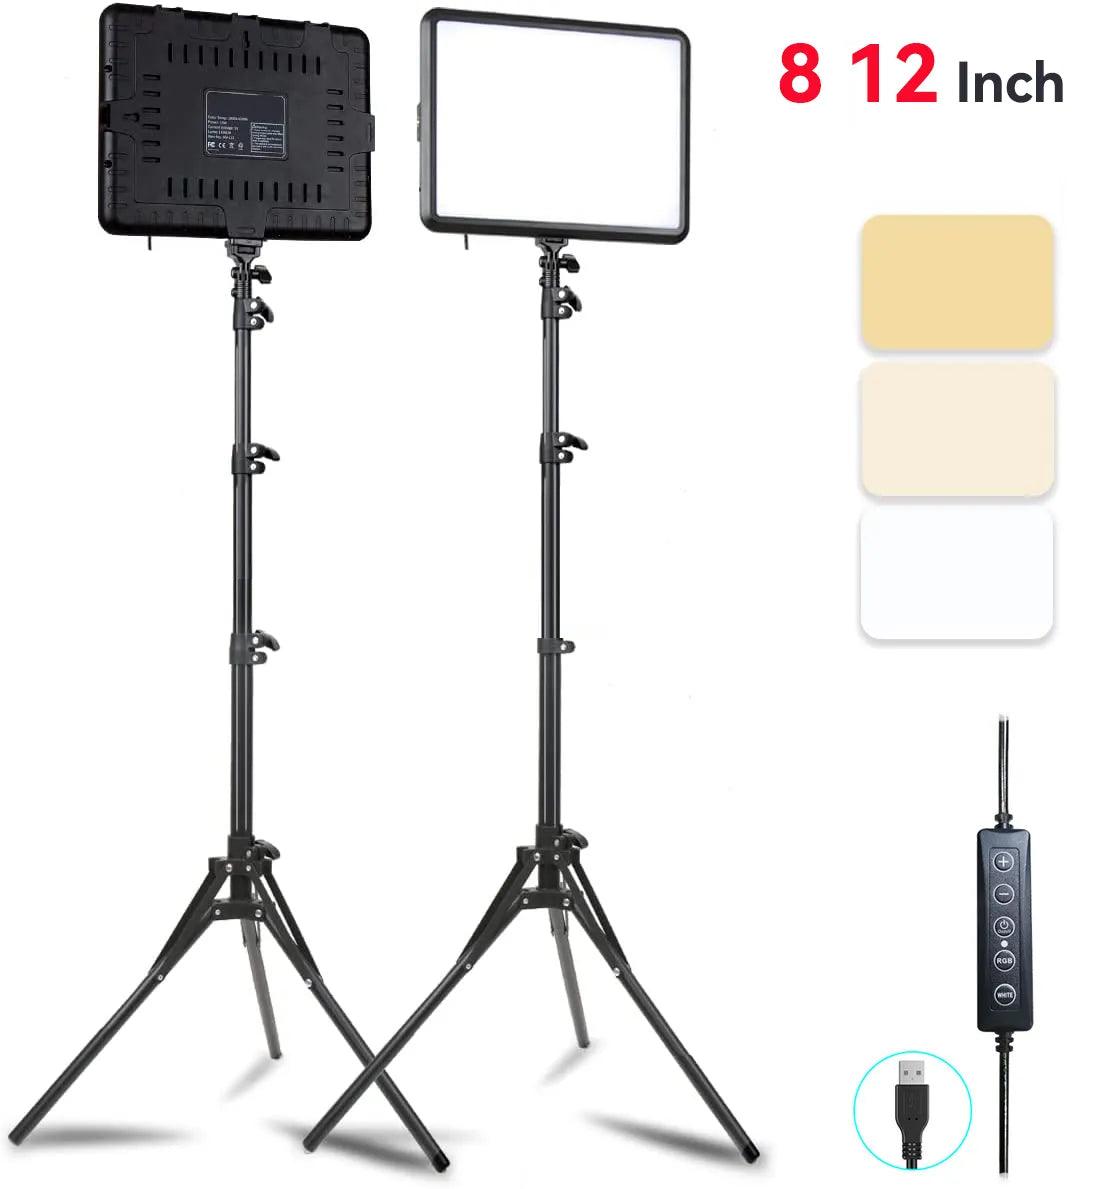 Adjustable LED Video Light with Tripod Stand for Photography Studio Shooting  ourlum.com   